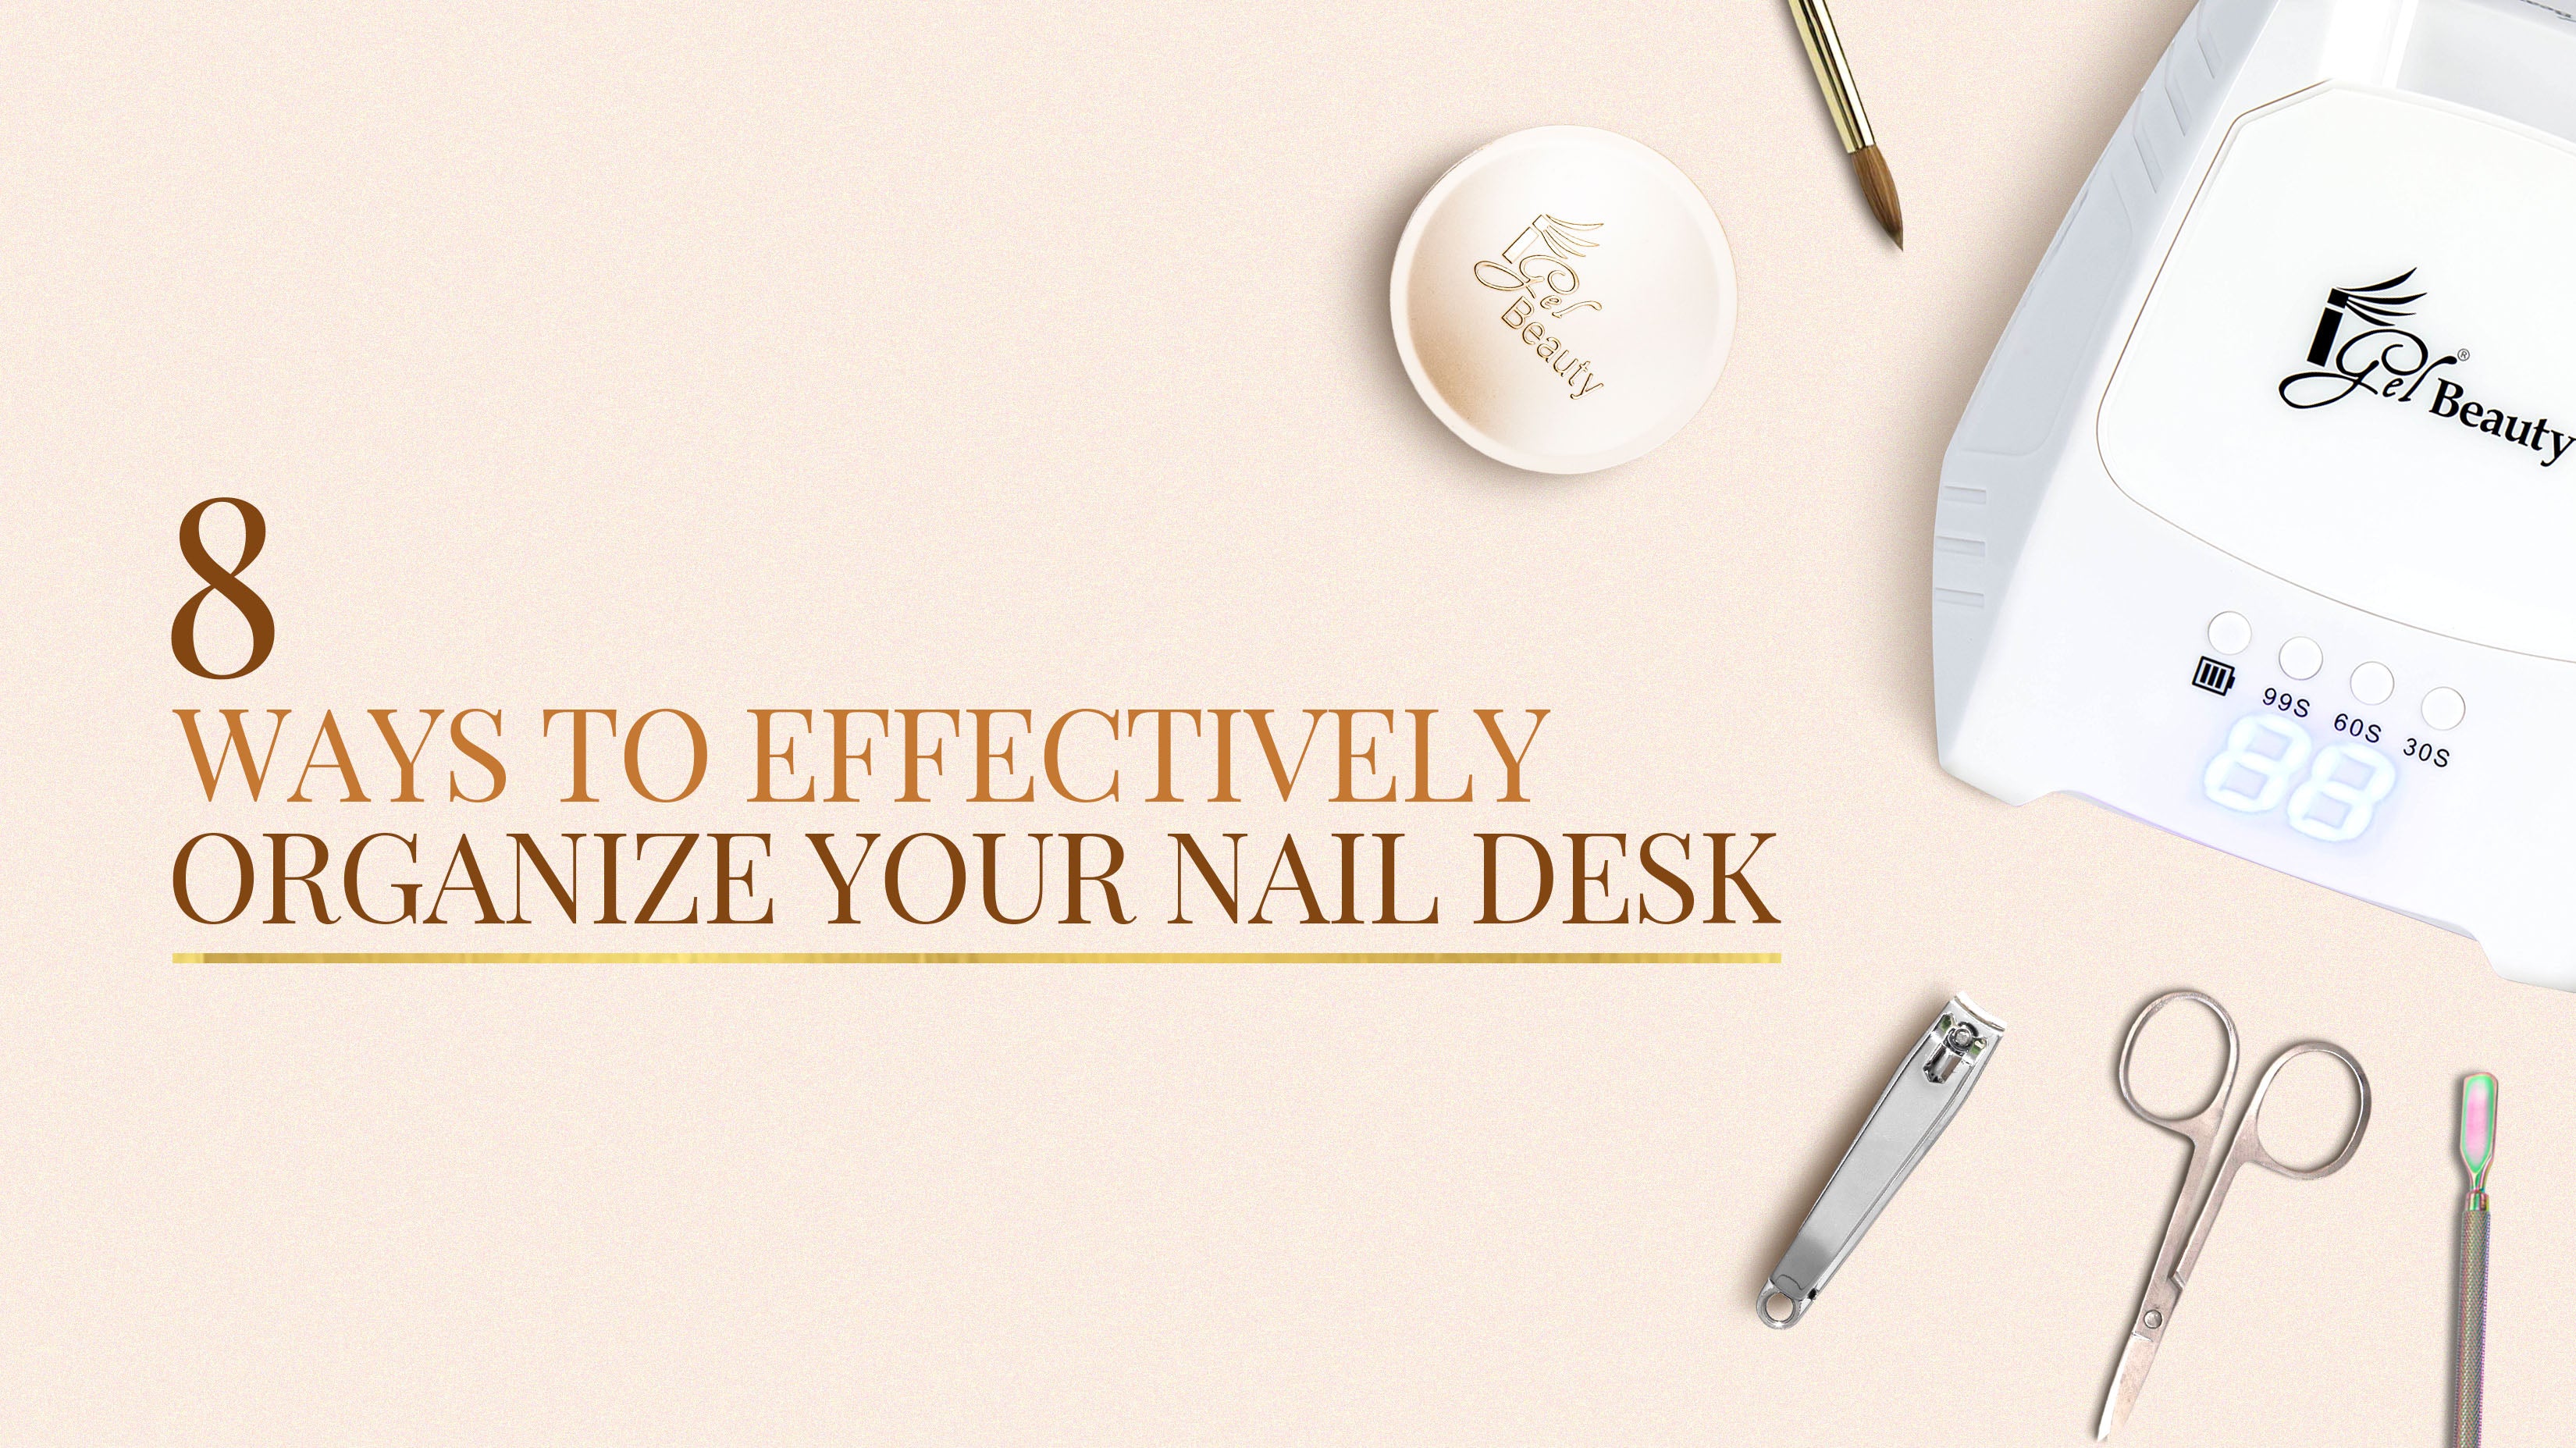 http://www.igelbeauty.com/cdn/shop/articles/12-31-21_-_8_Ways_to_Effectively_Organize_Your_Nail_Desk_-_THUMBNAIL_2.jpg?v=1642214625